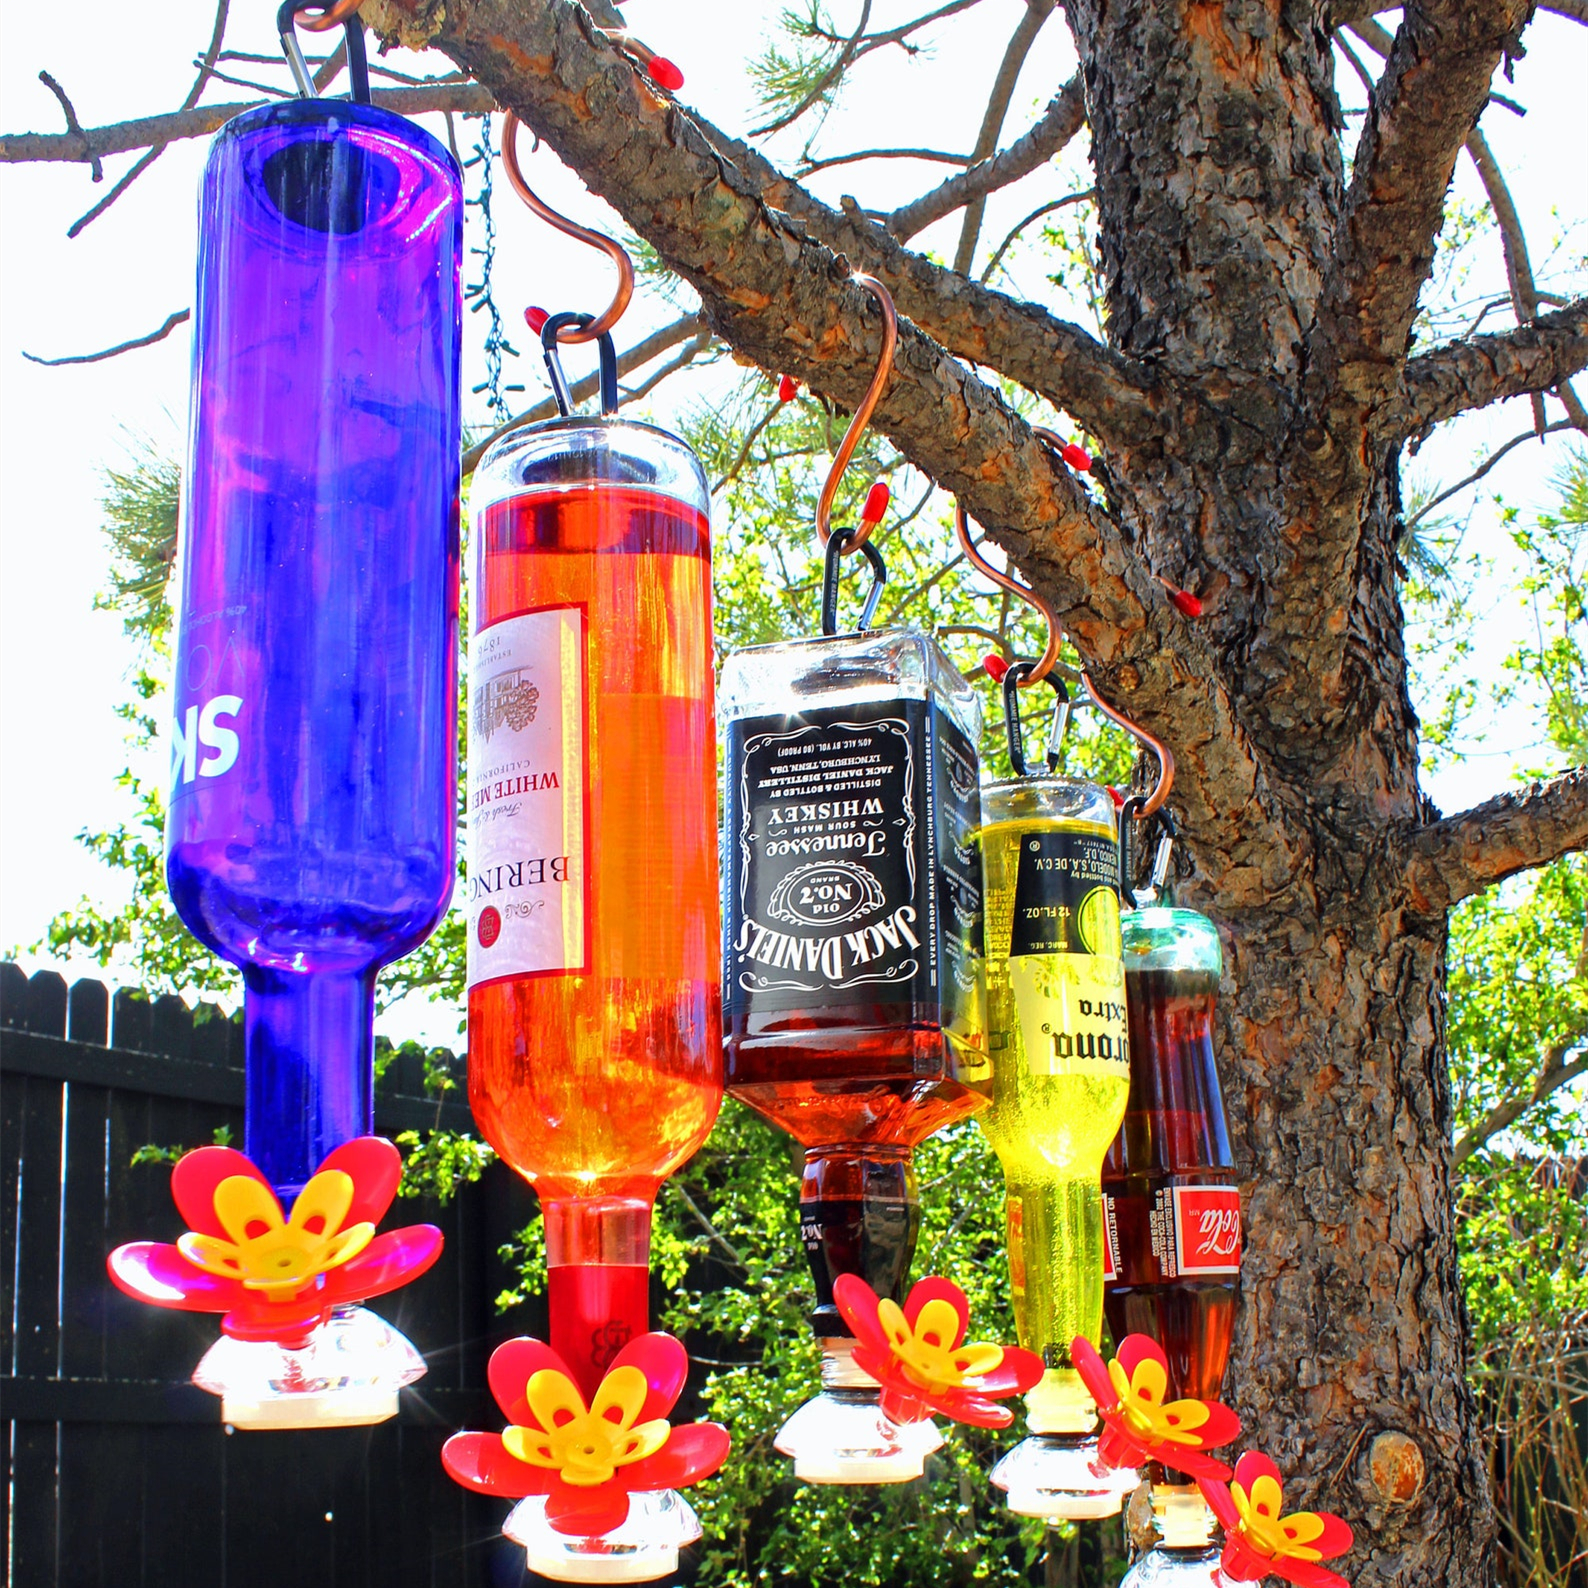 Bob KIT Turn Your Own Recycled Bottles into The Best Hummingbird Feeder!